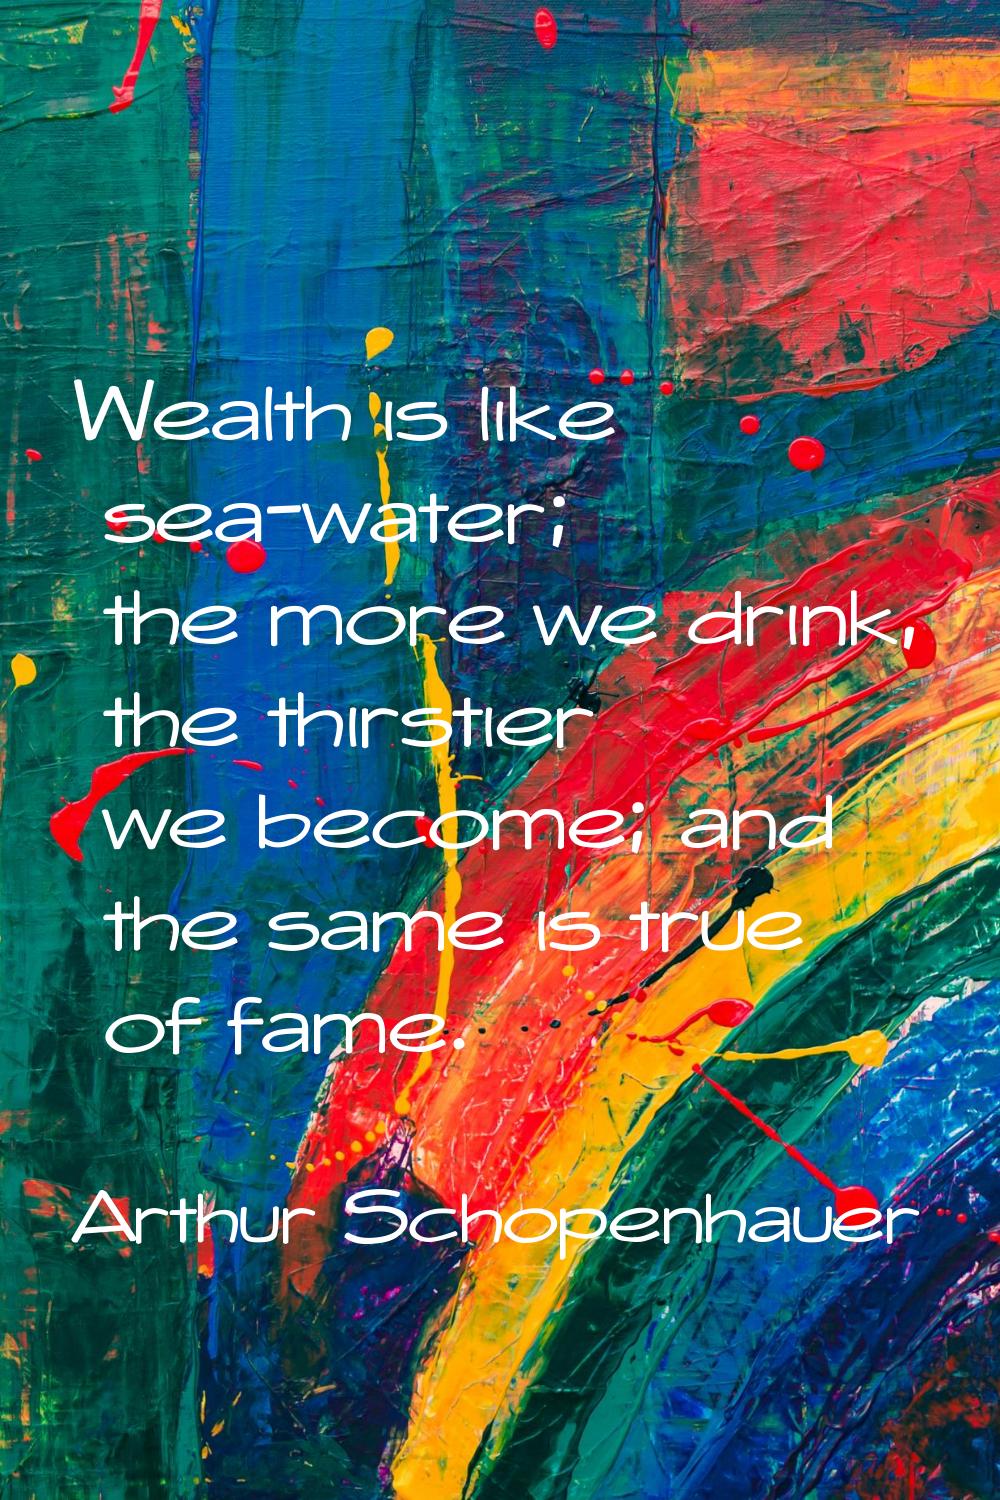 Wealth is like sea-water; the more we drink, the thirstier we become; and the same is true of fame.